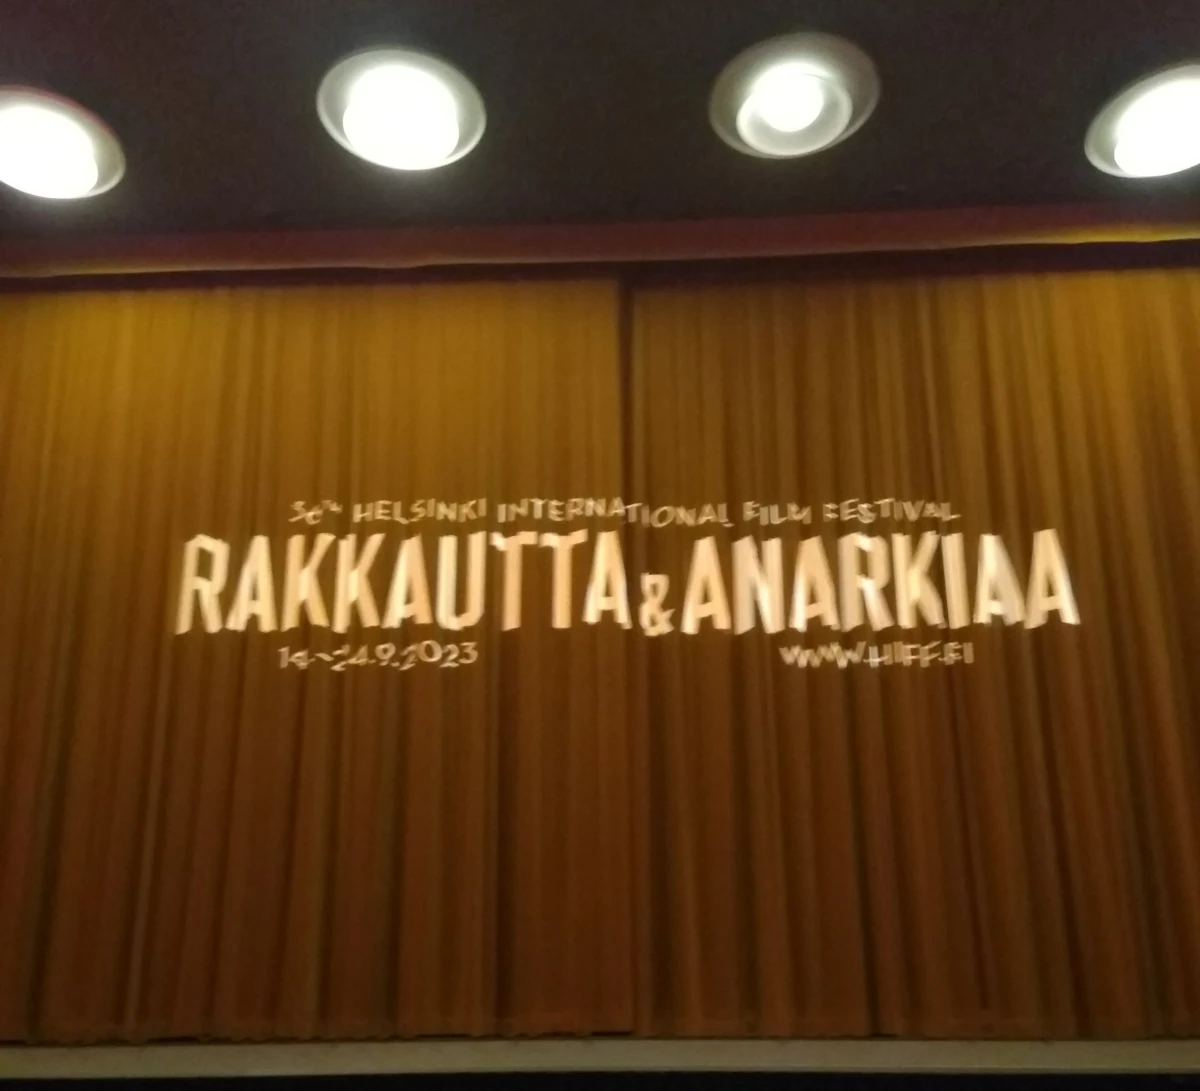 Blurry picture of beige curtains with the logo of Helsinki International Film Festival projected on them.